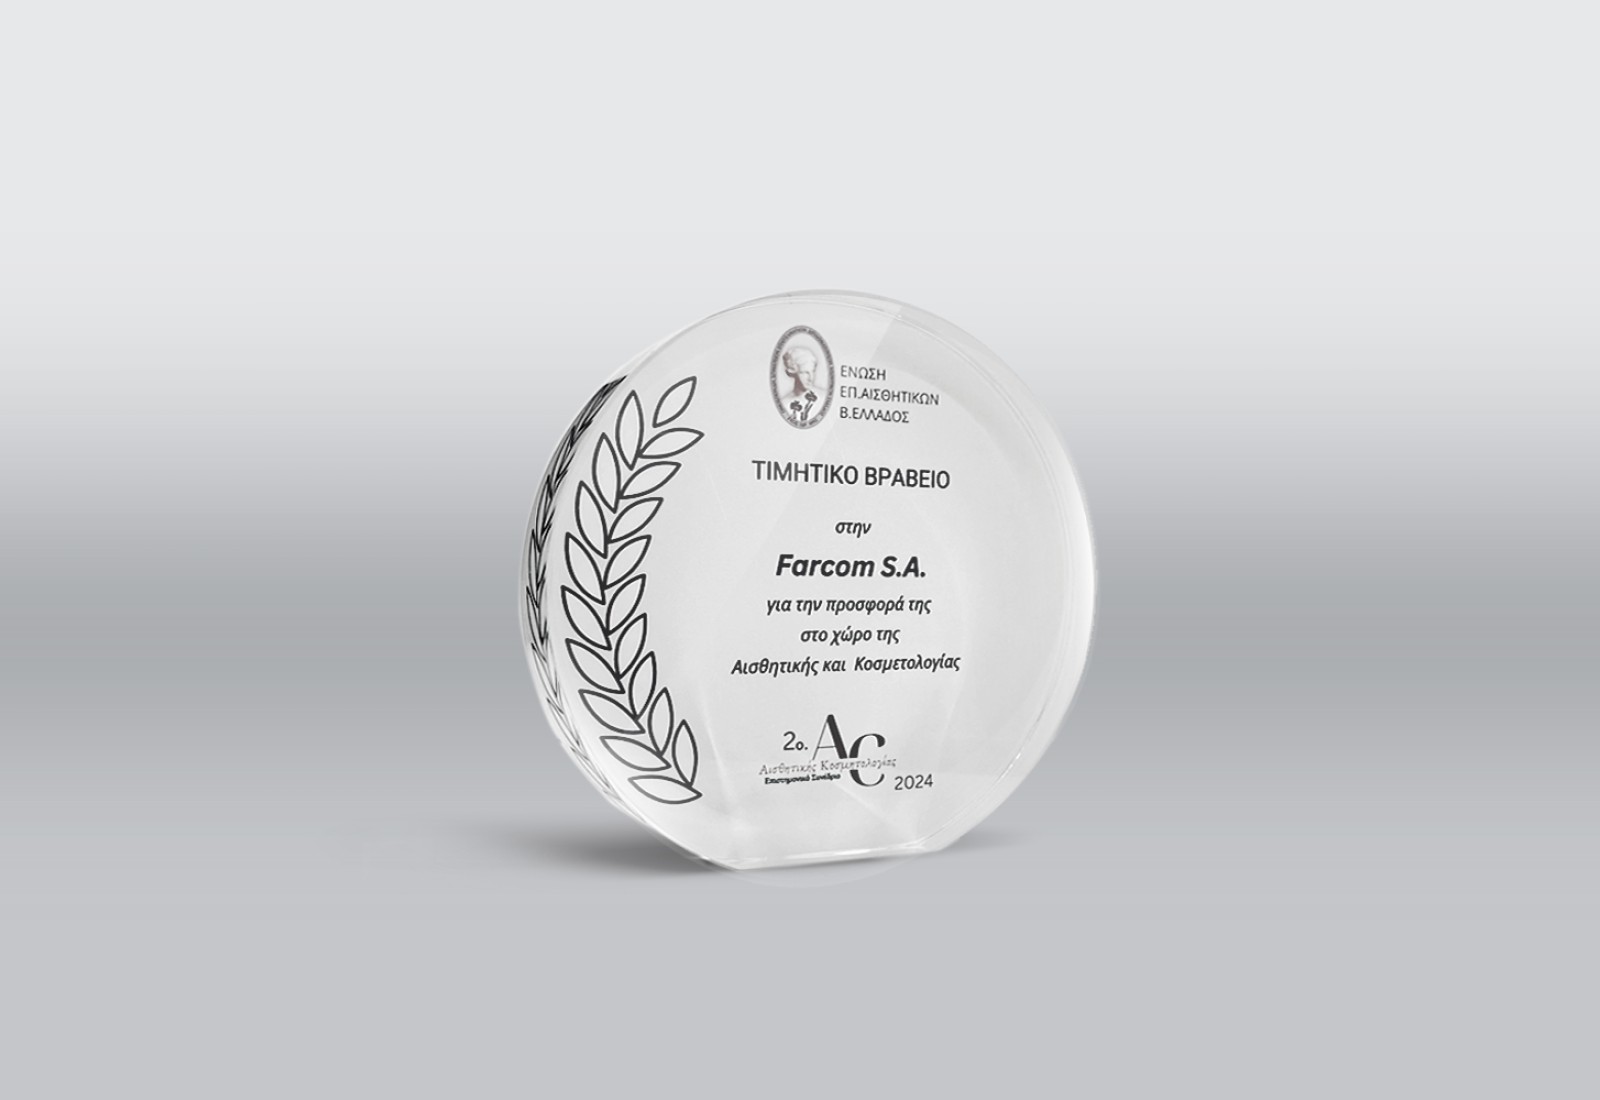 New honorary award for FARCOM at the 2nd Scientific Conference of Aesthetics-Cosmetology